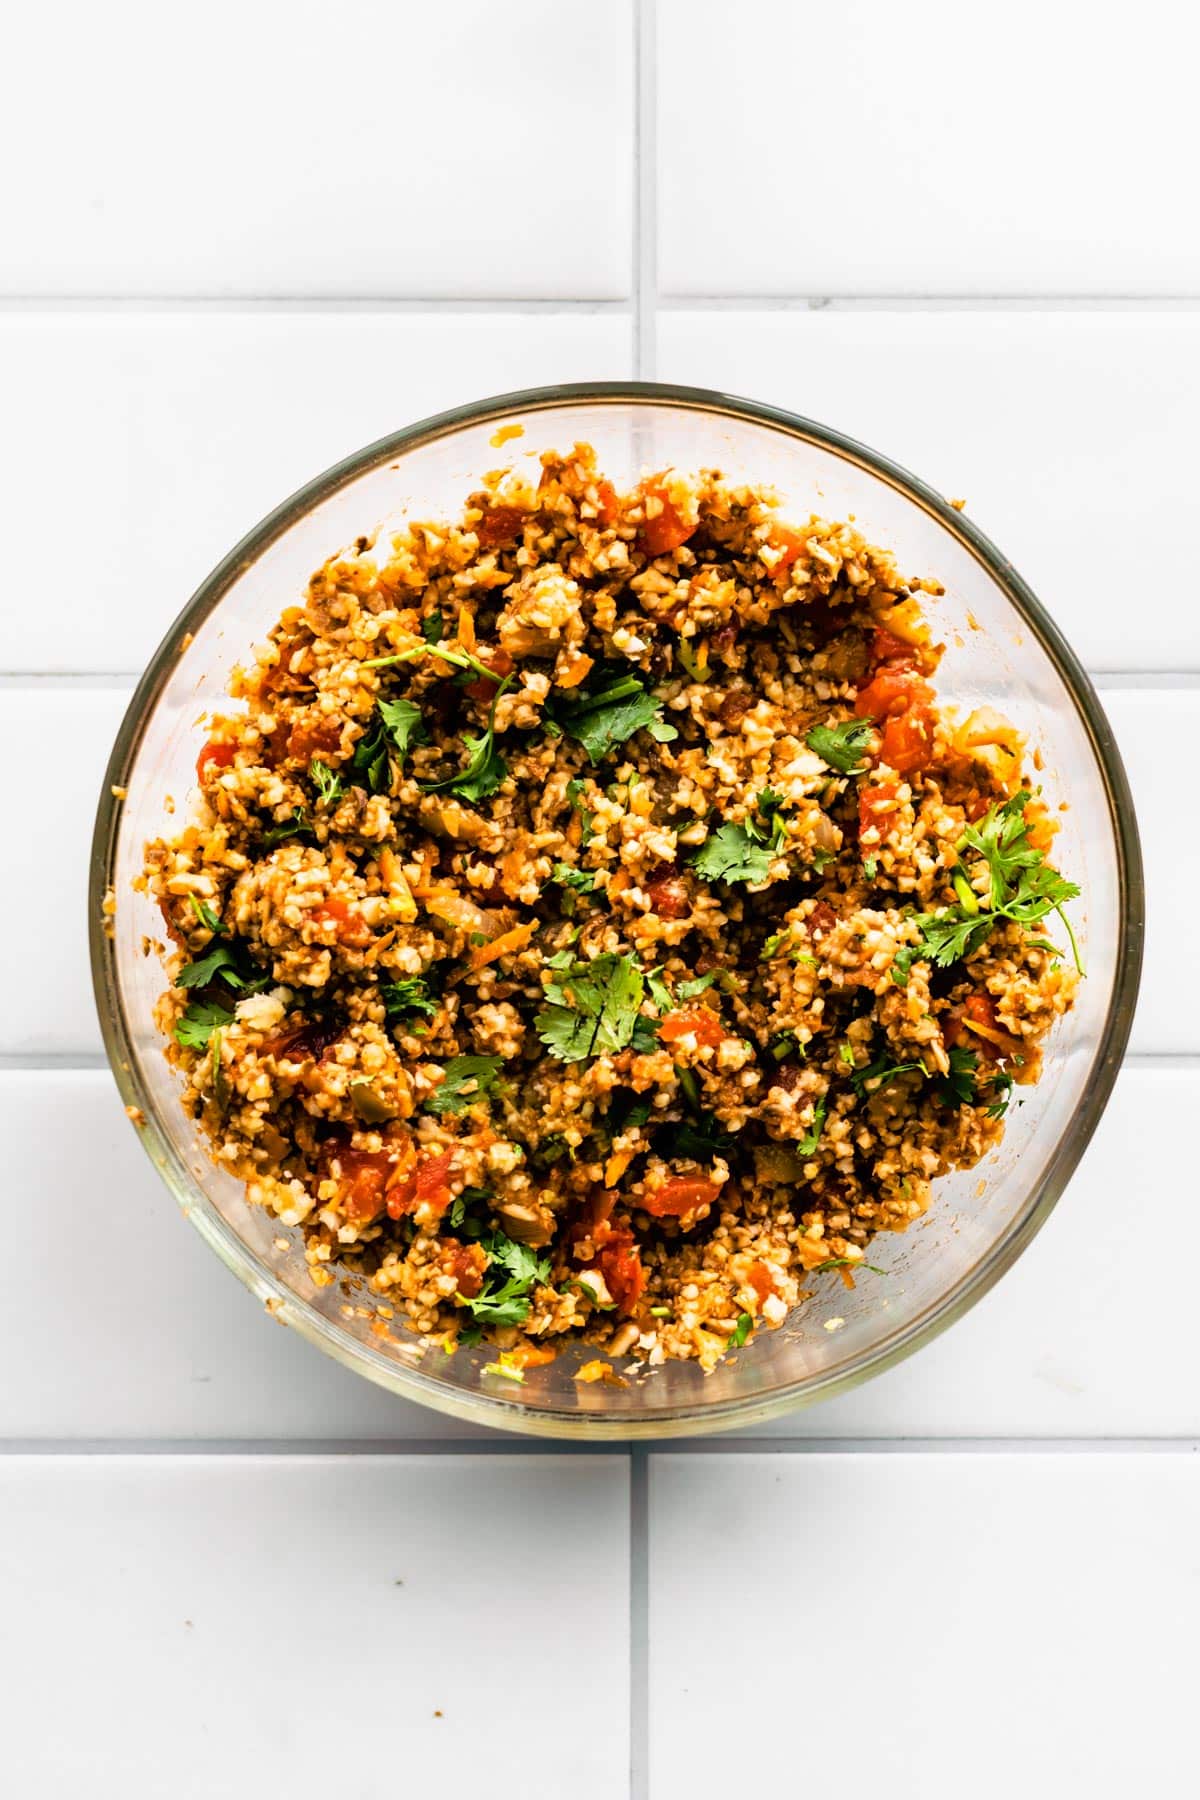 A bowl of vegetarian taco meat, quinoa, diced tomatoes and cilantro.